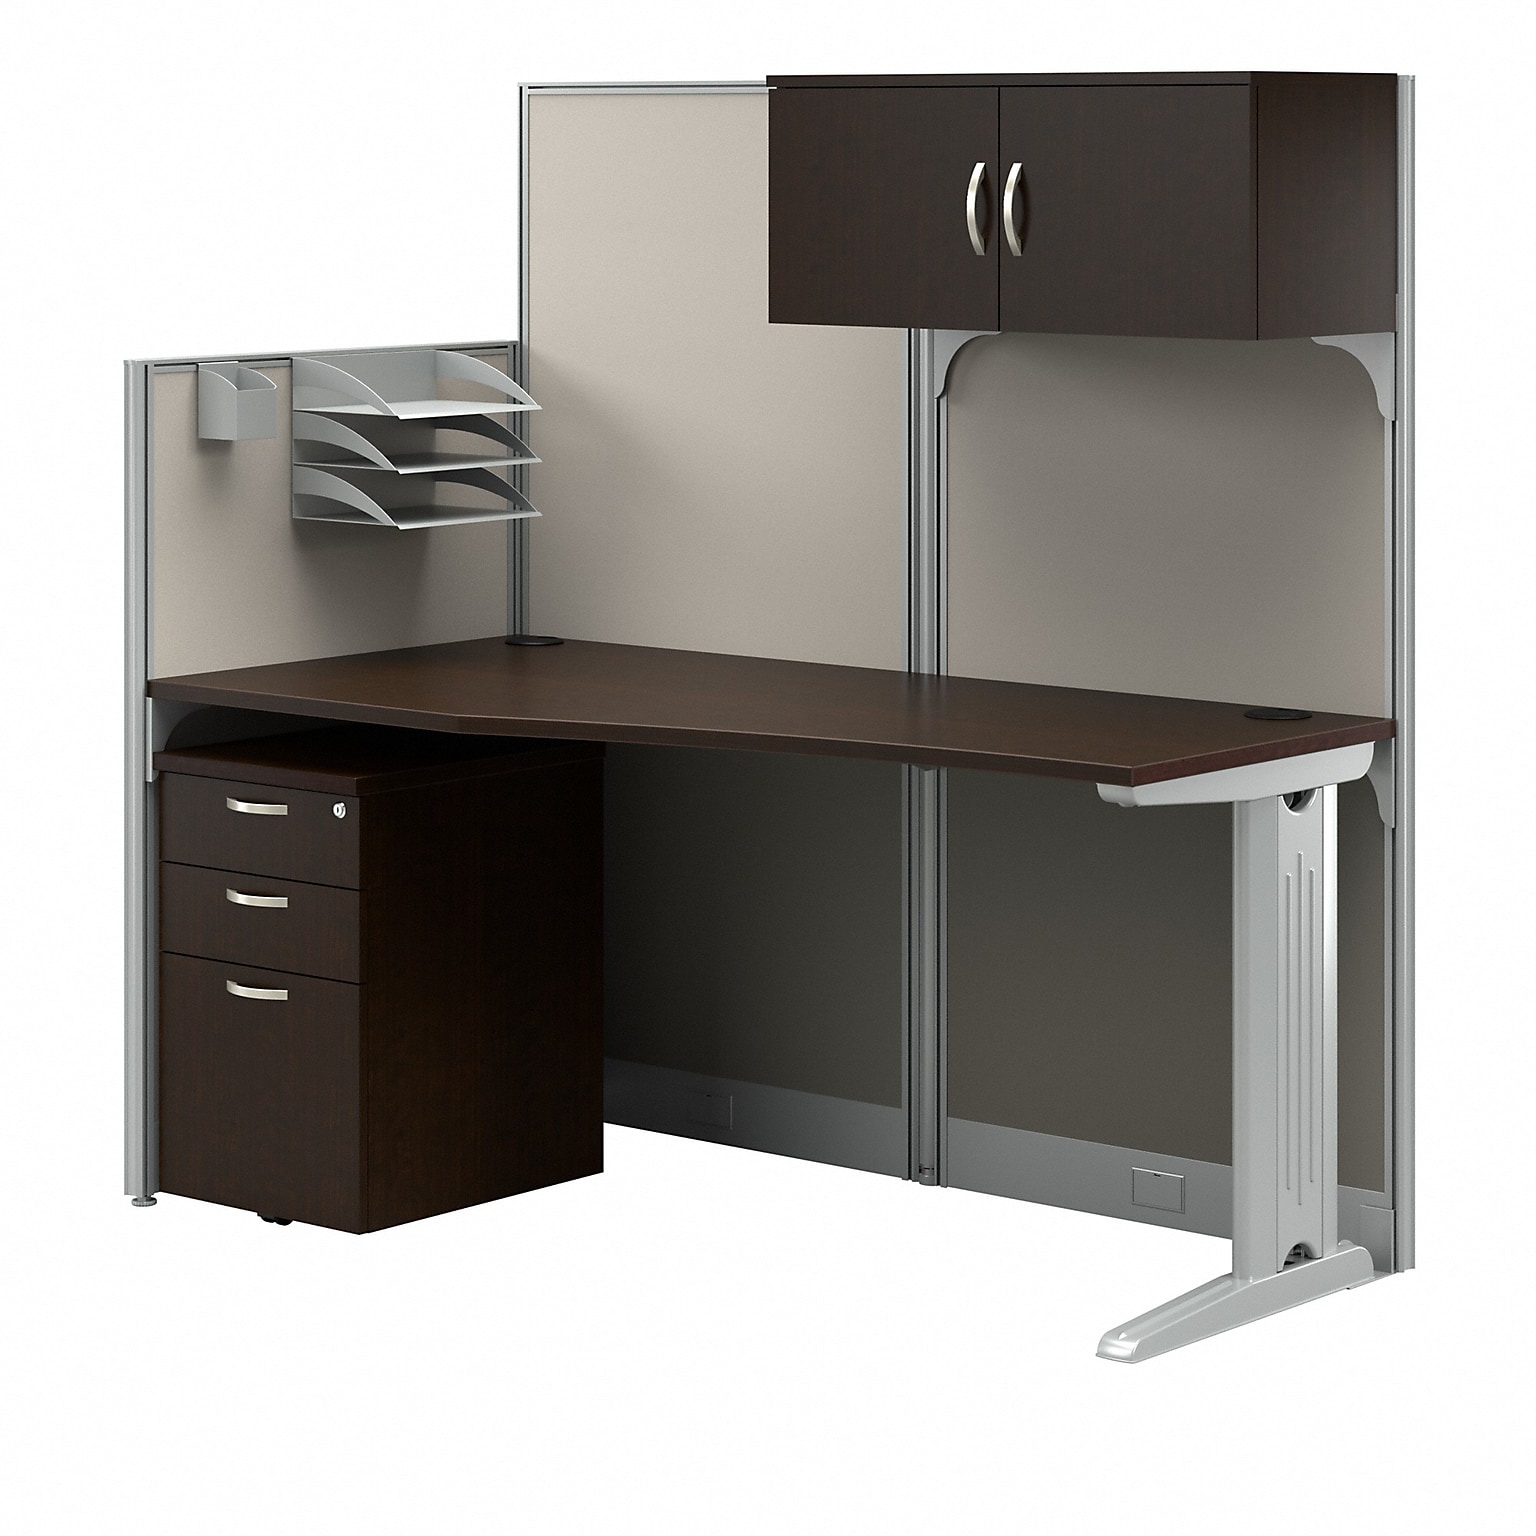 Bush Business Furniture Office in an Hour 63H x 65W Cubicle Workstation, Mocha Cherry (WC36892-03STGK)